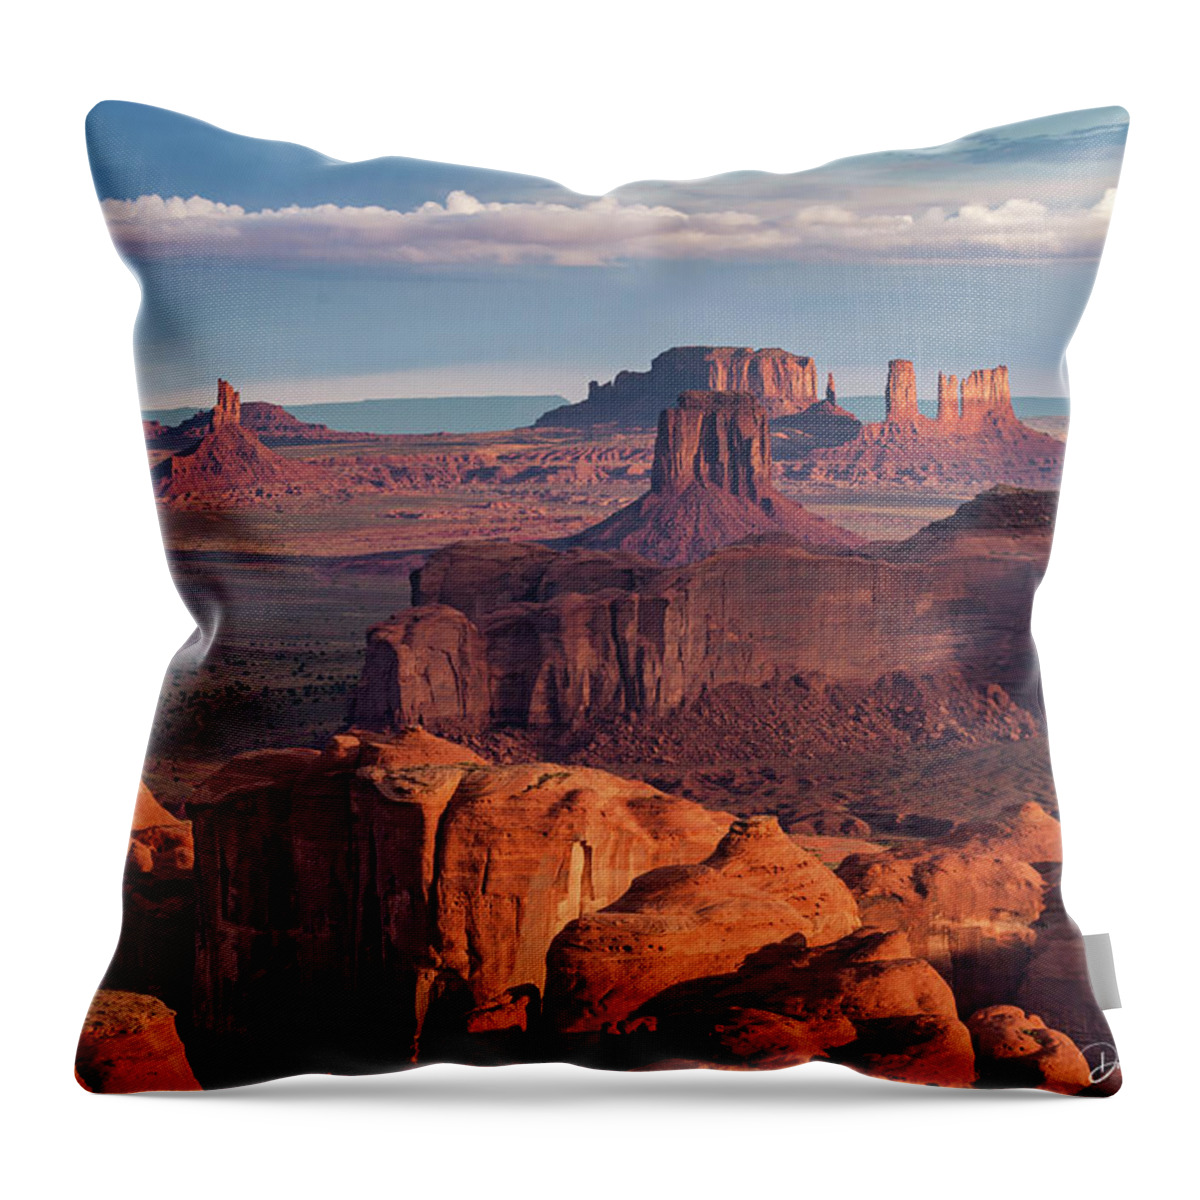 Southwest Desert Arizona Monument Valley Dineh Sunrise Stagecoach Red Rock Colorado Plateau Throw Pillow featuring the photograph Sunrise from Hunt's Mesa by Dan Norris